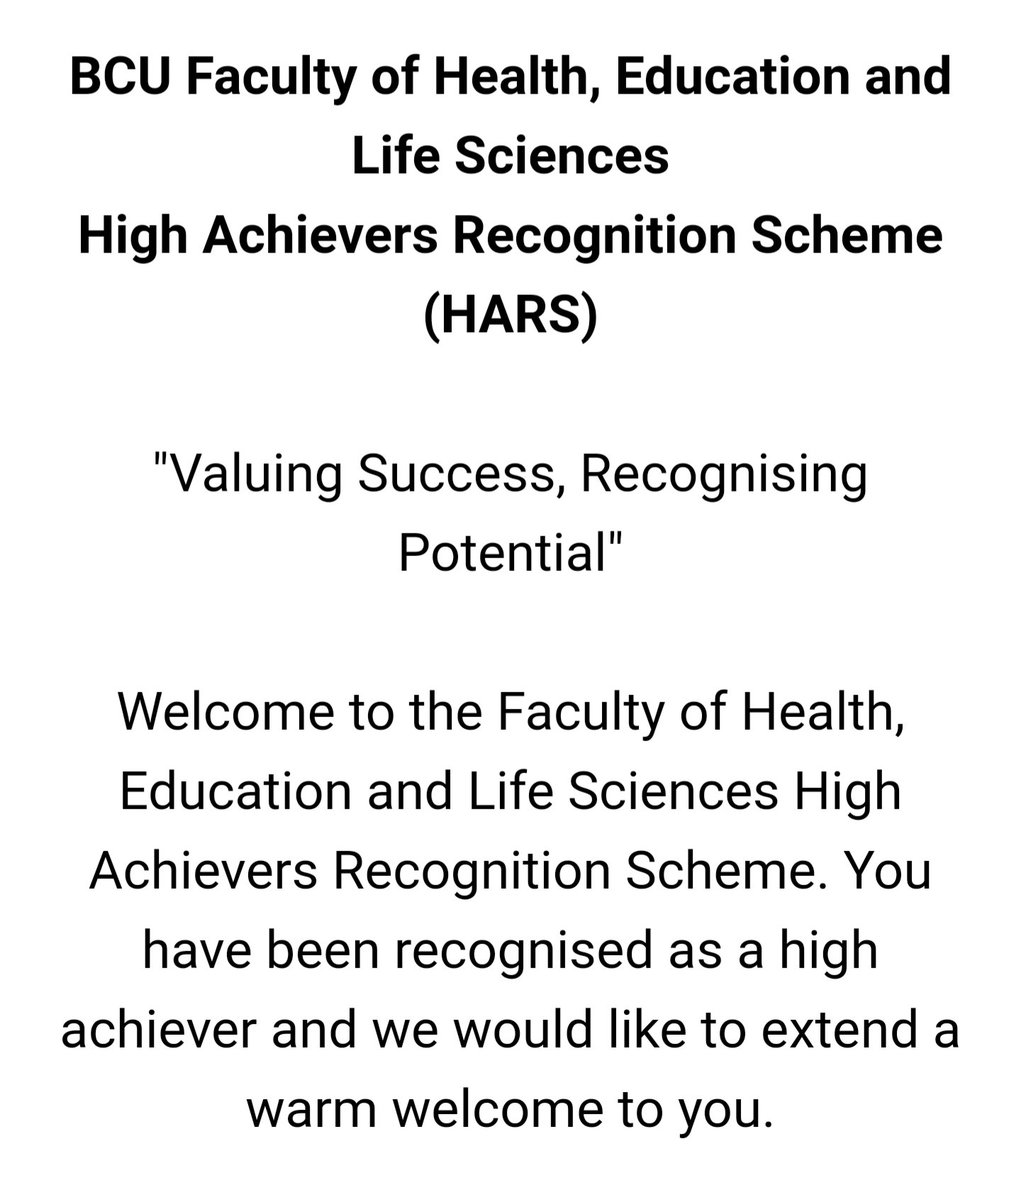 Well I did not expect this at all today in my emails :) I have been recognised as a high achiever! Over the moon 🤗 @HARSbcu @BCUDefence #bcu #studentnurse #armynurse #swimmer #runner #rower #fitness #goals #learning #commitment